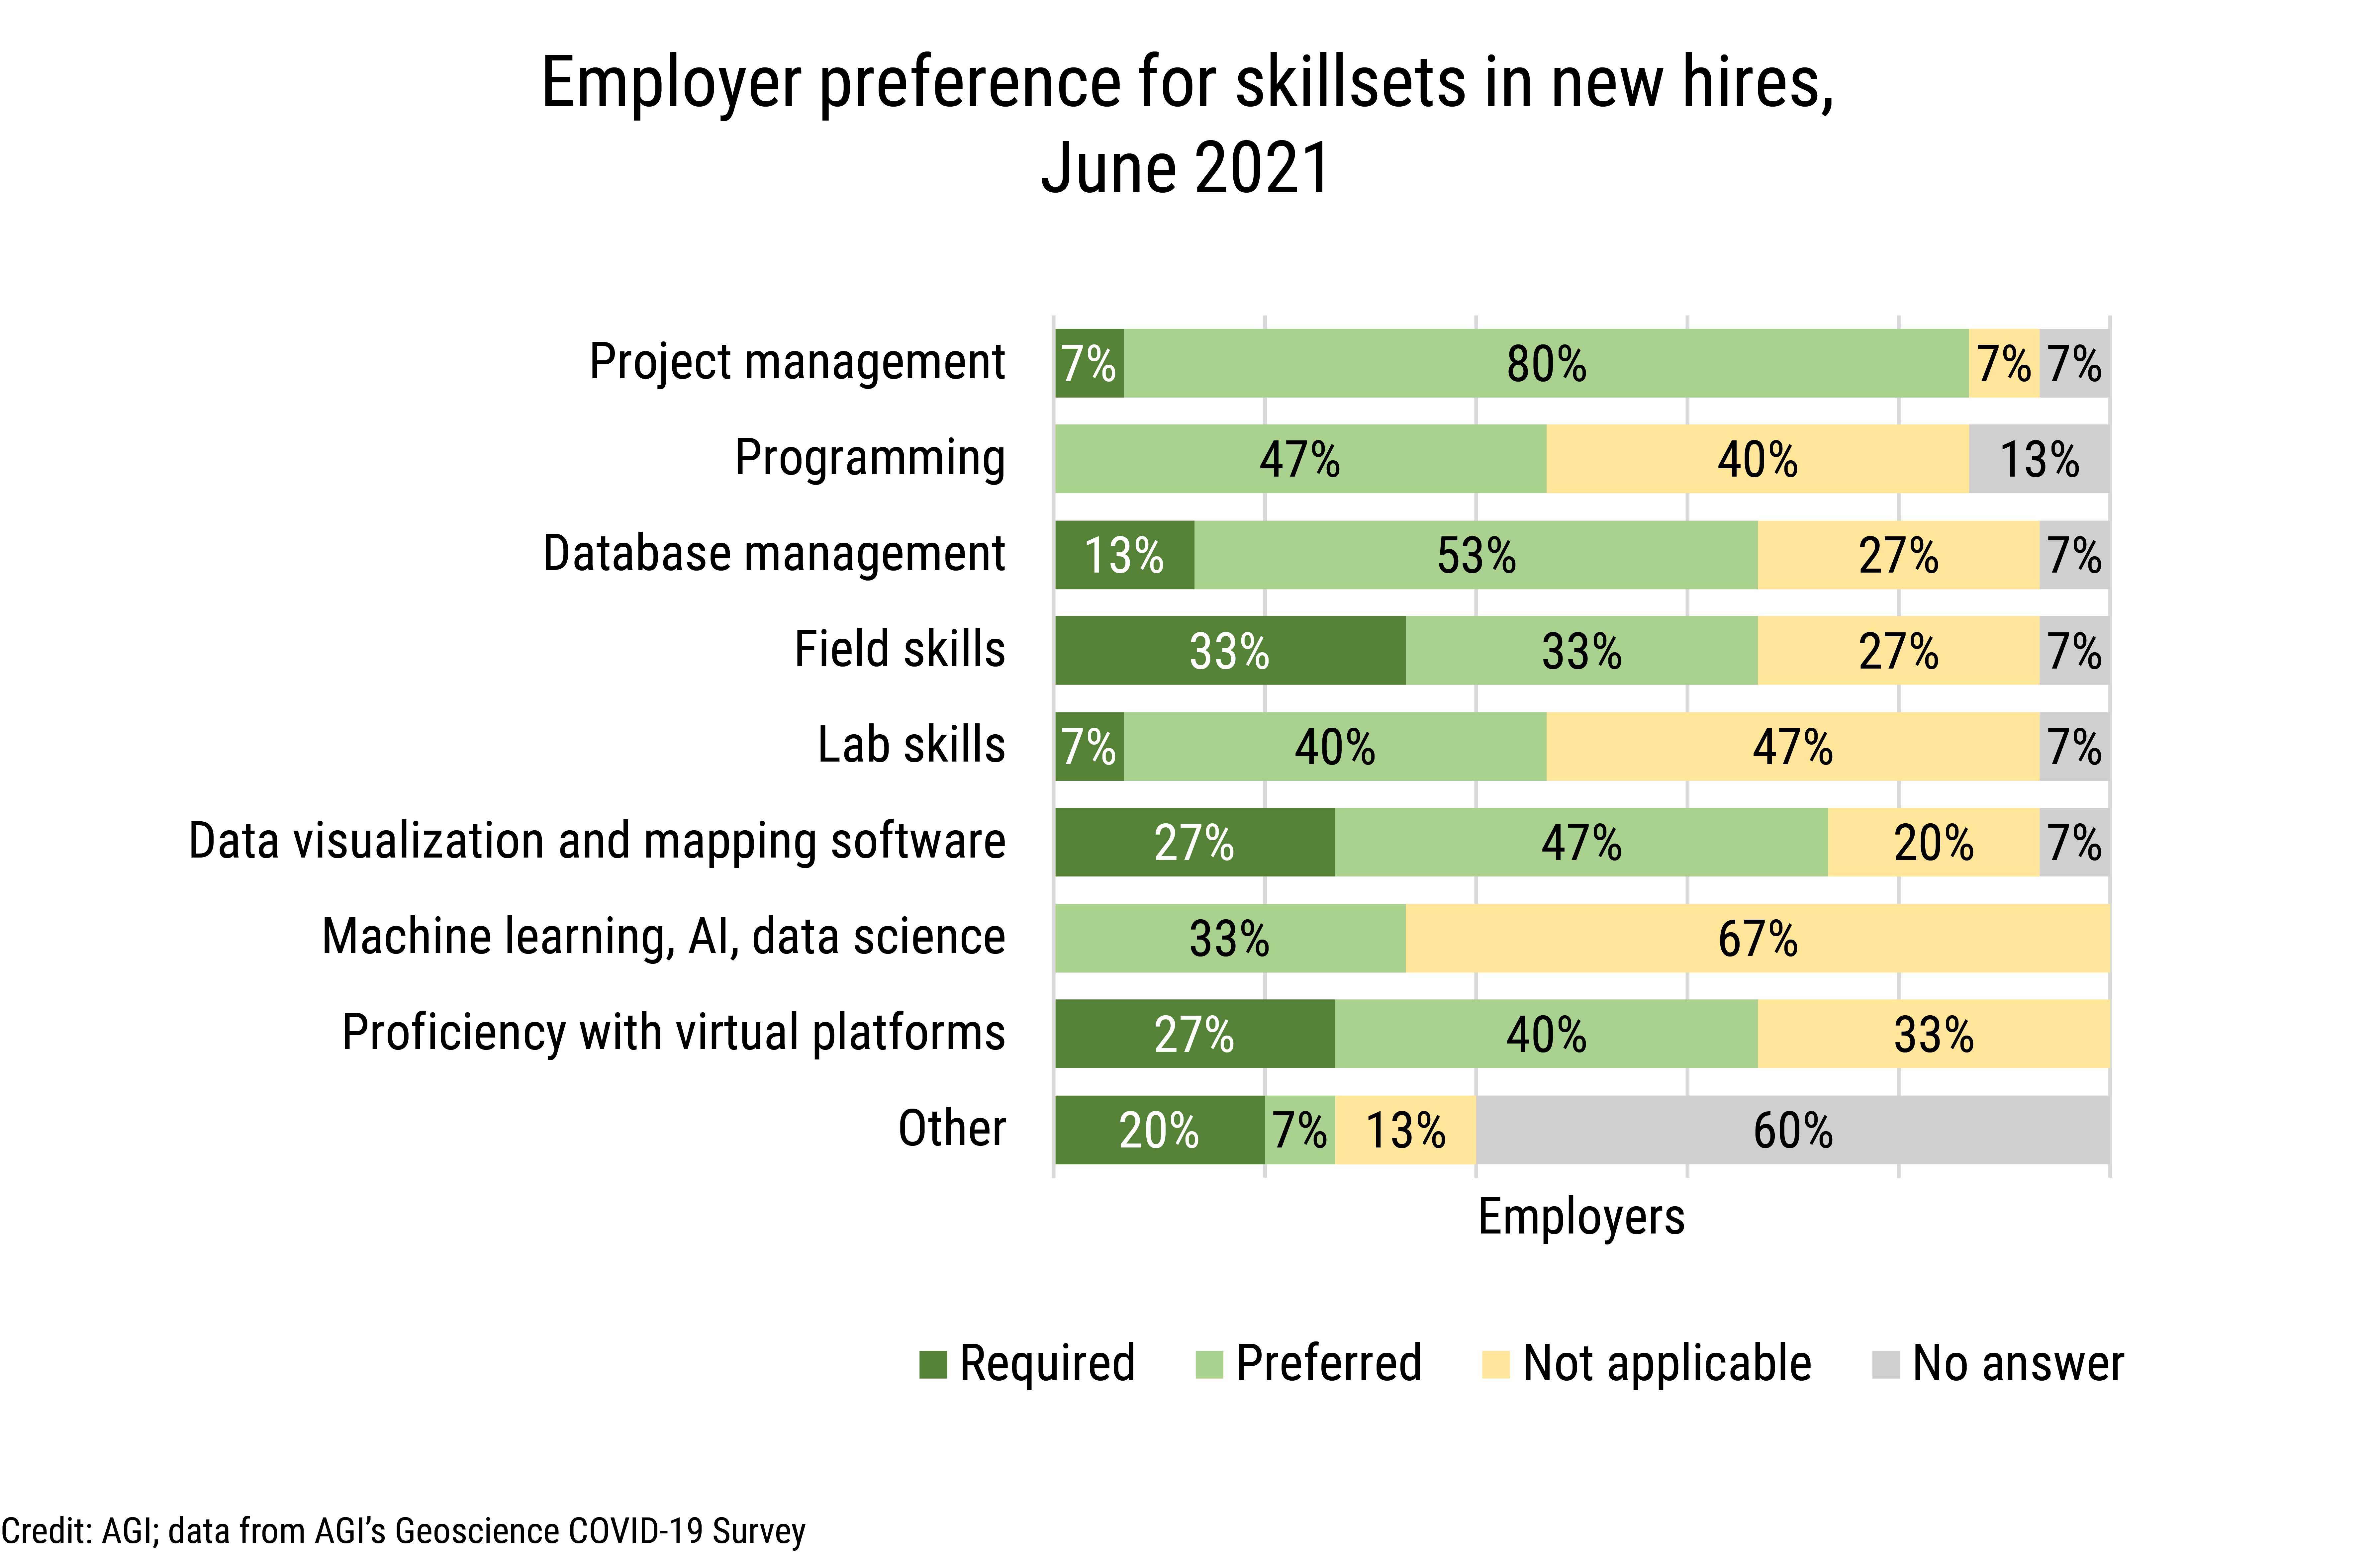 DB_2021-030 chart 10: Employer preference for skillsets in new hires (Credit: AGI; data from AGI's Geoscience COVID-19 Survey)